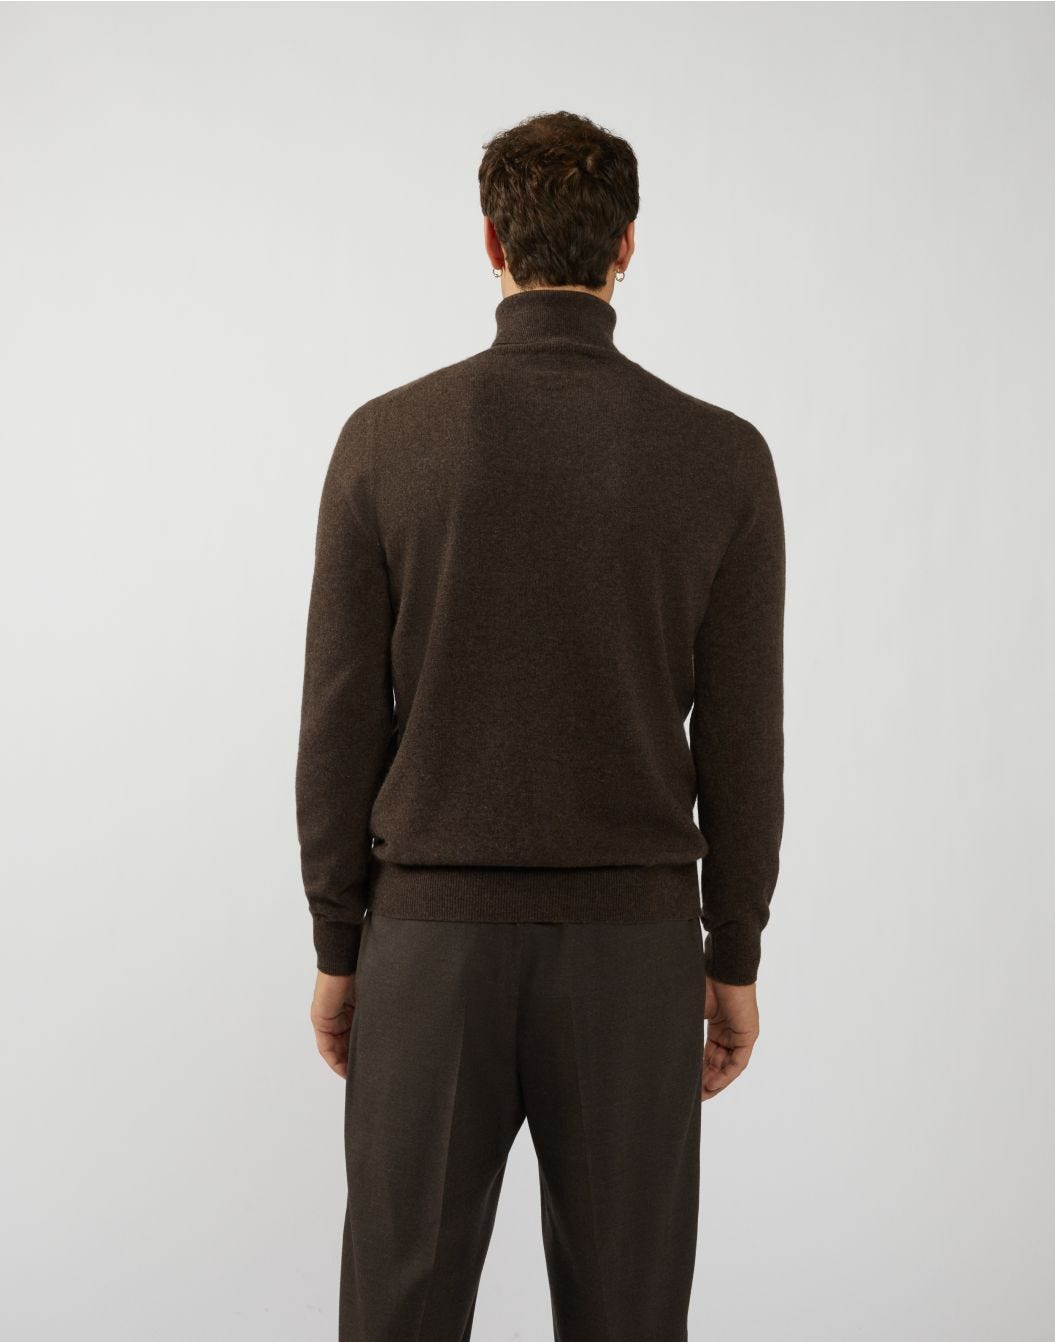 Turtleneck in brown yarn-dyed cashmere